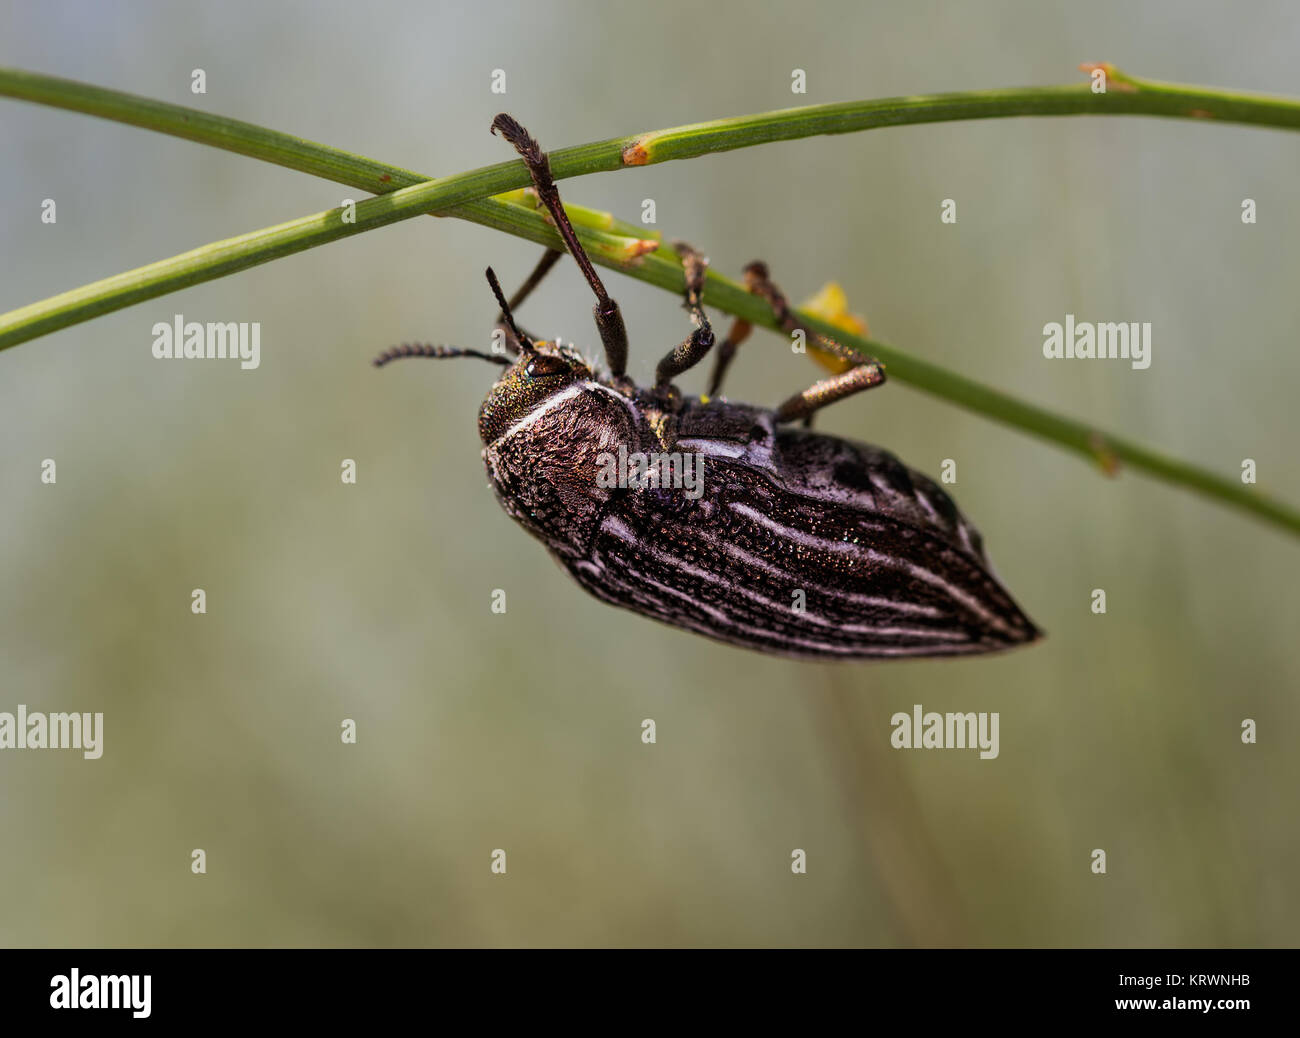 Beetle photographed in their natural environment. Stock Photo